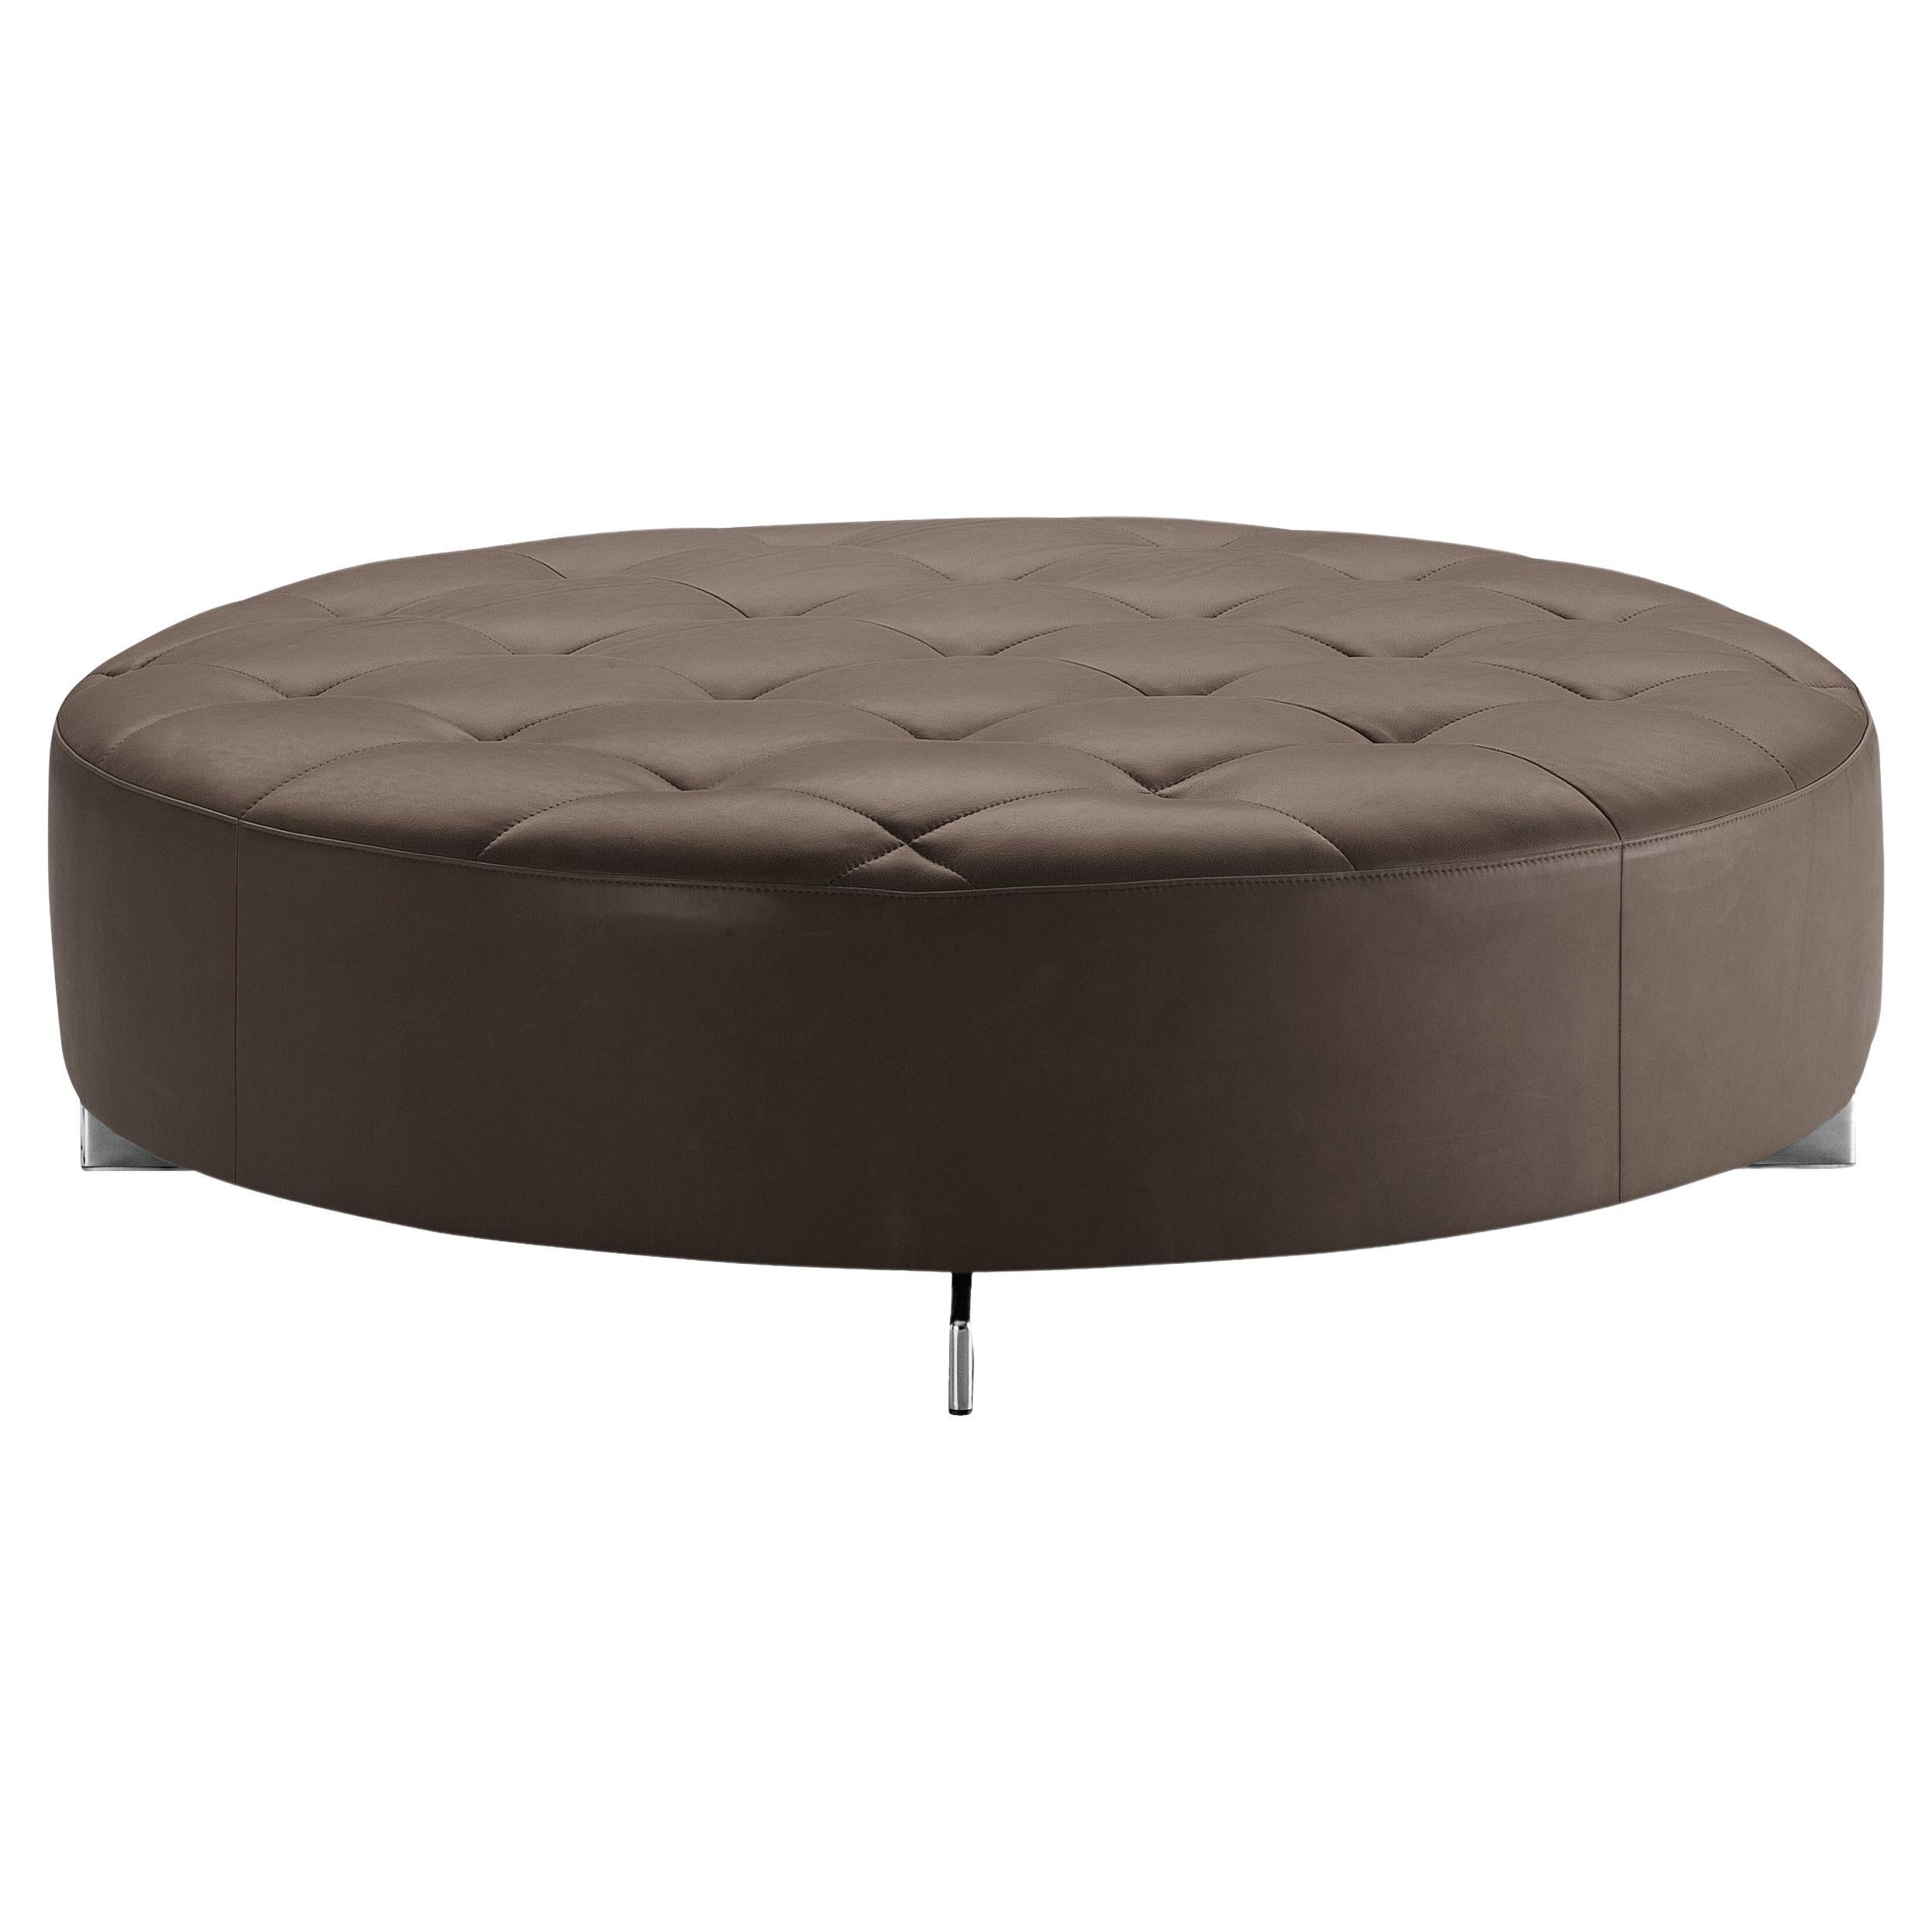 Zanotta Scott Pouf in Brown Nappa Leather with Polished Aluminum Frame